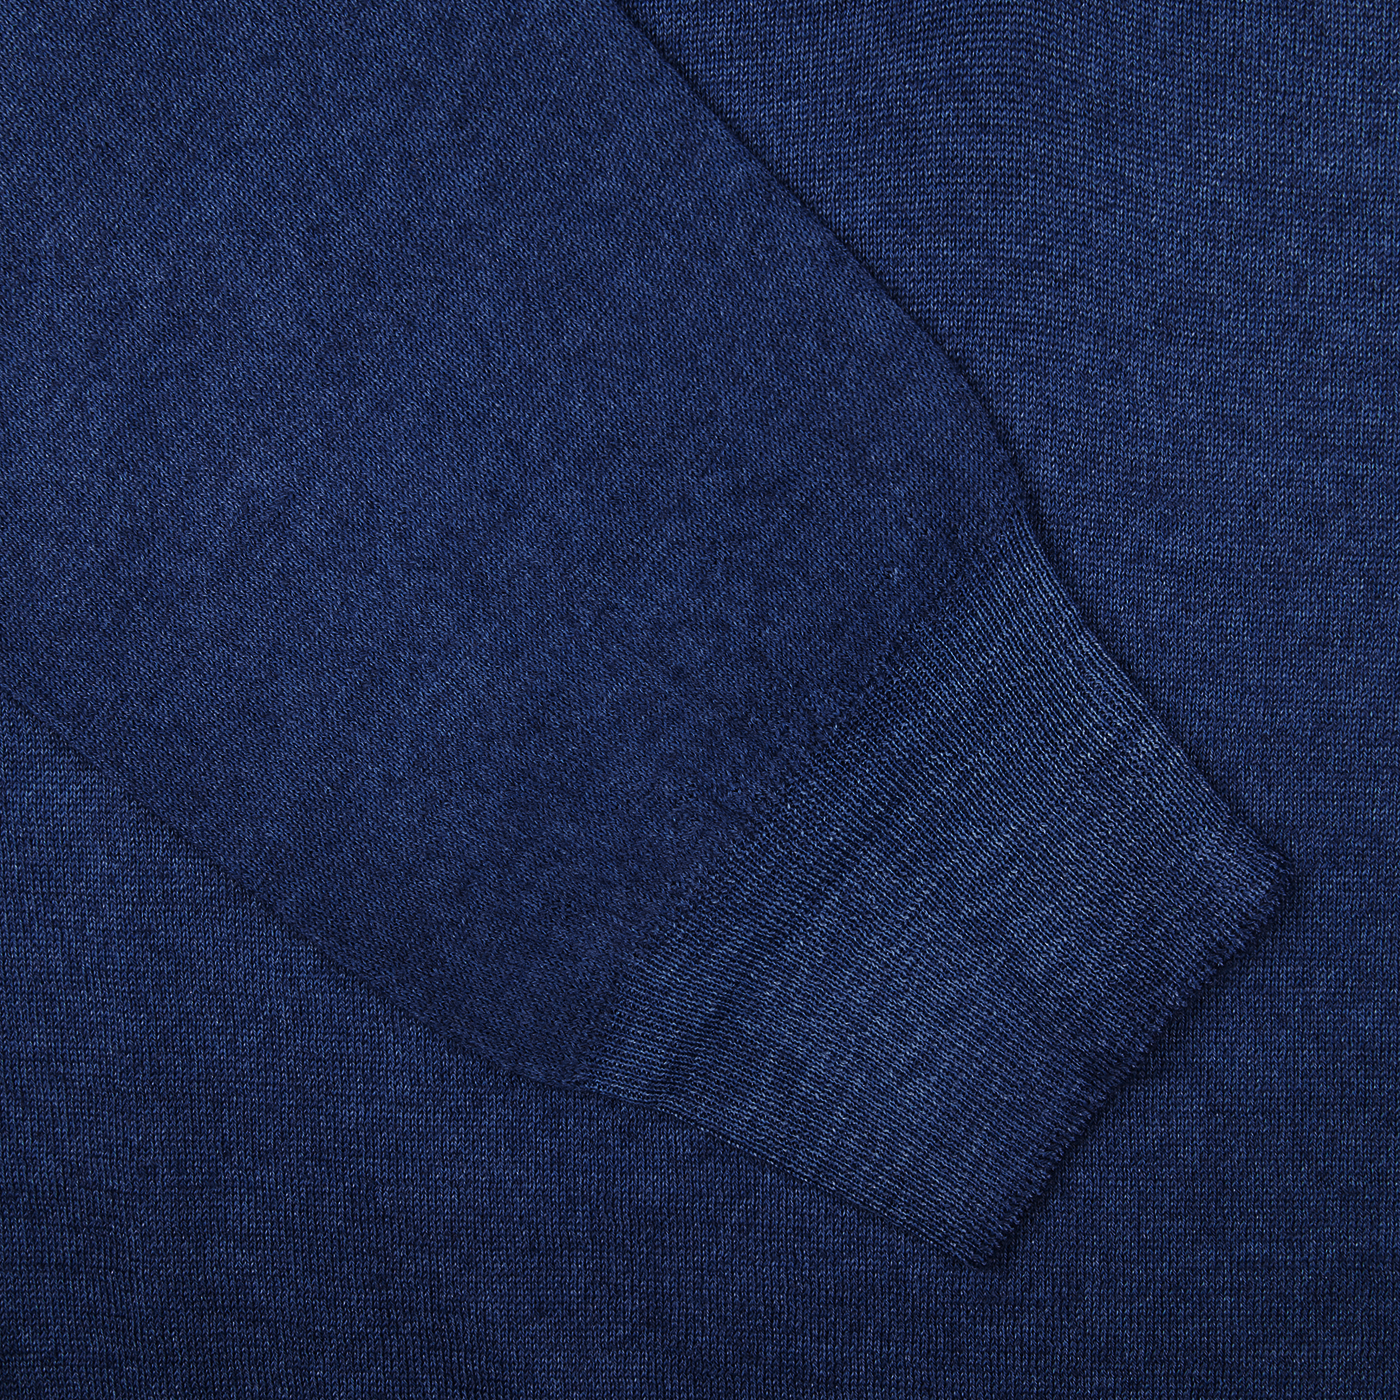 Close-up of Gran Sasso Blue Melange Vintage Merino Wool Zip Cardigan fabric texture with visible weave pattern, offering a vintage feel.